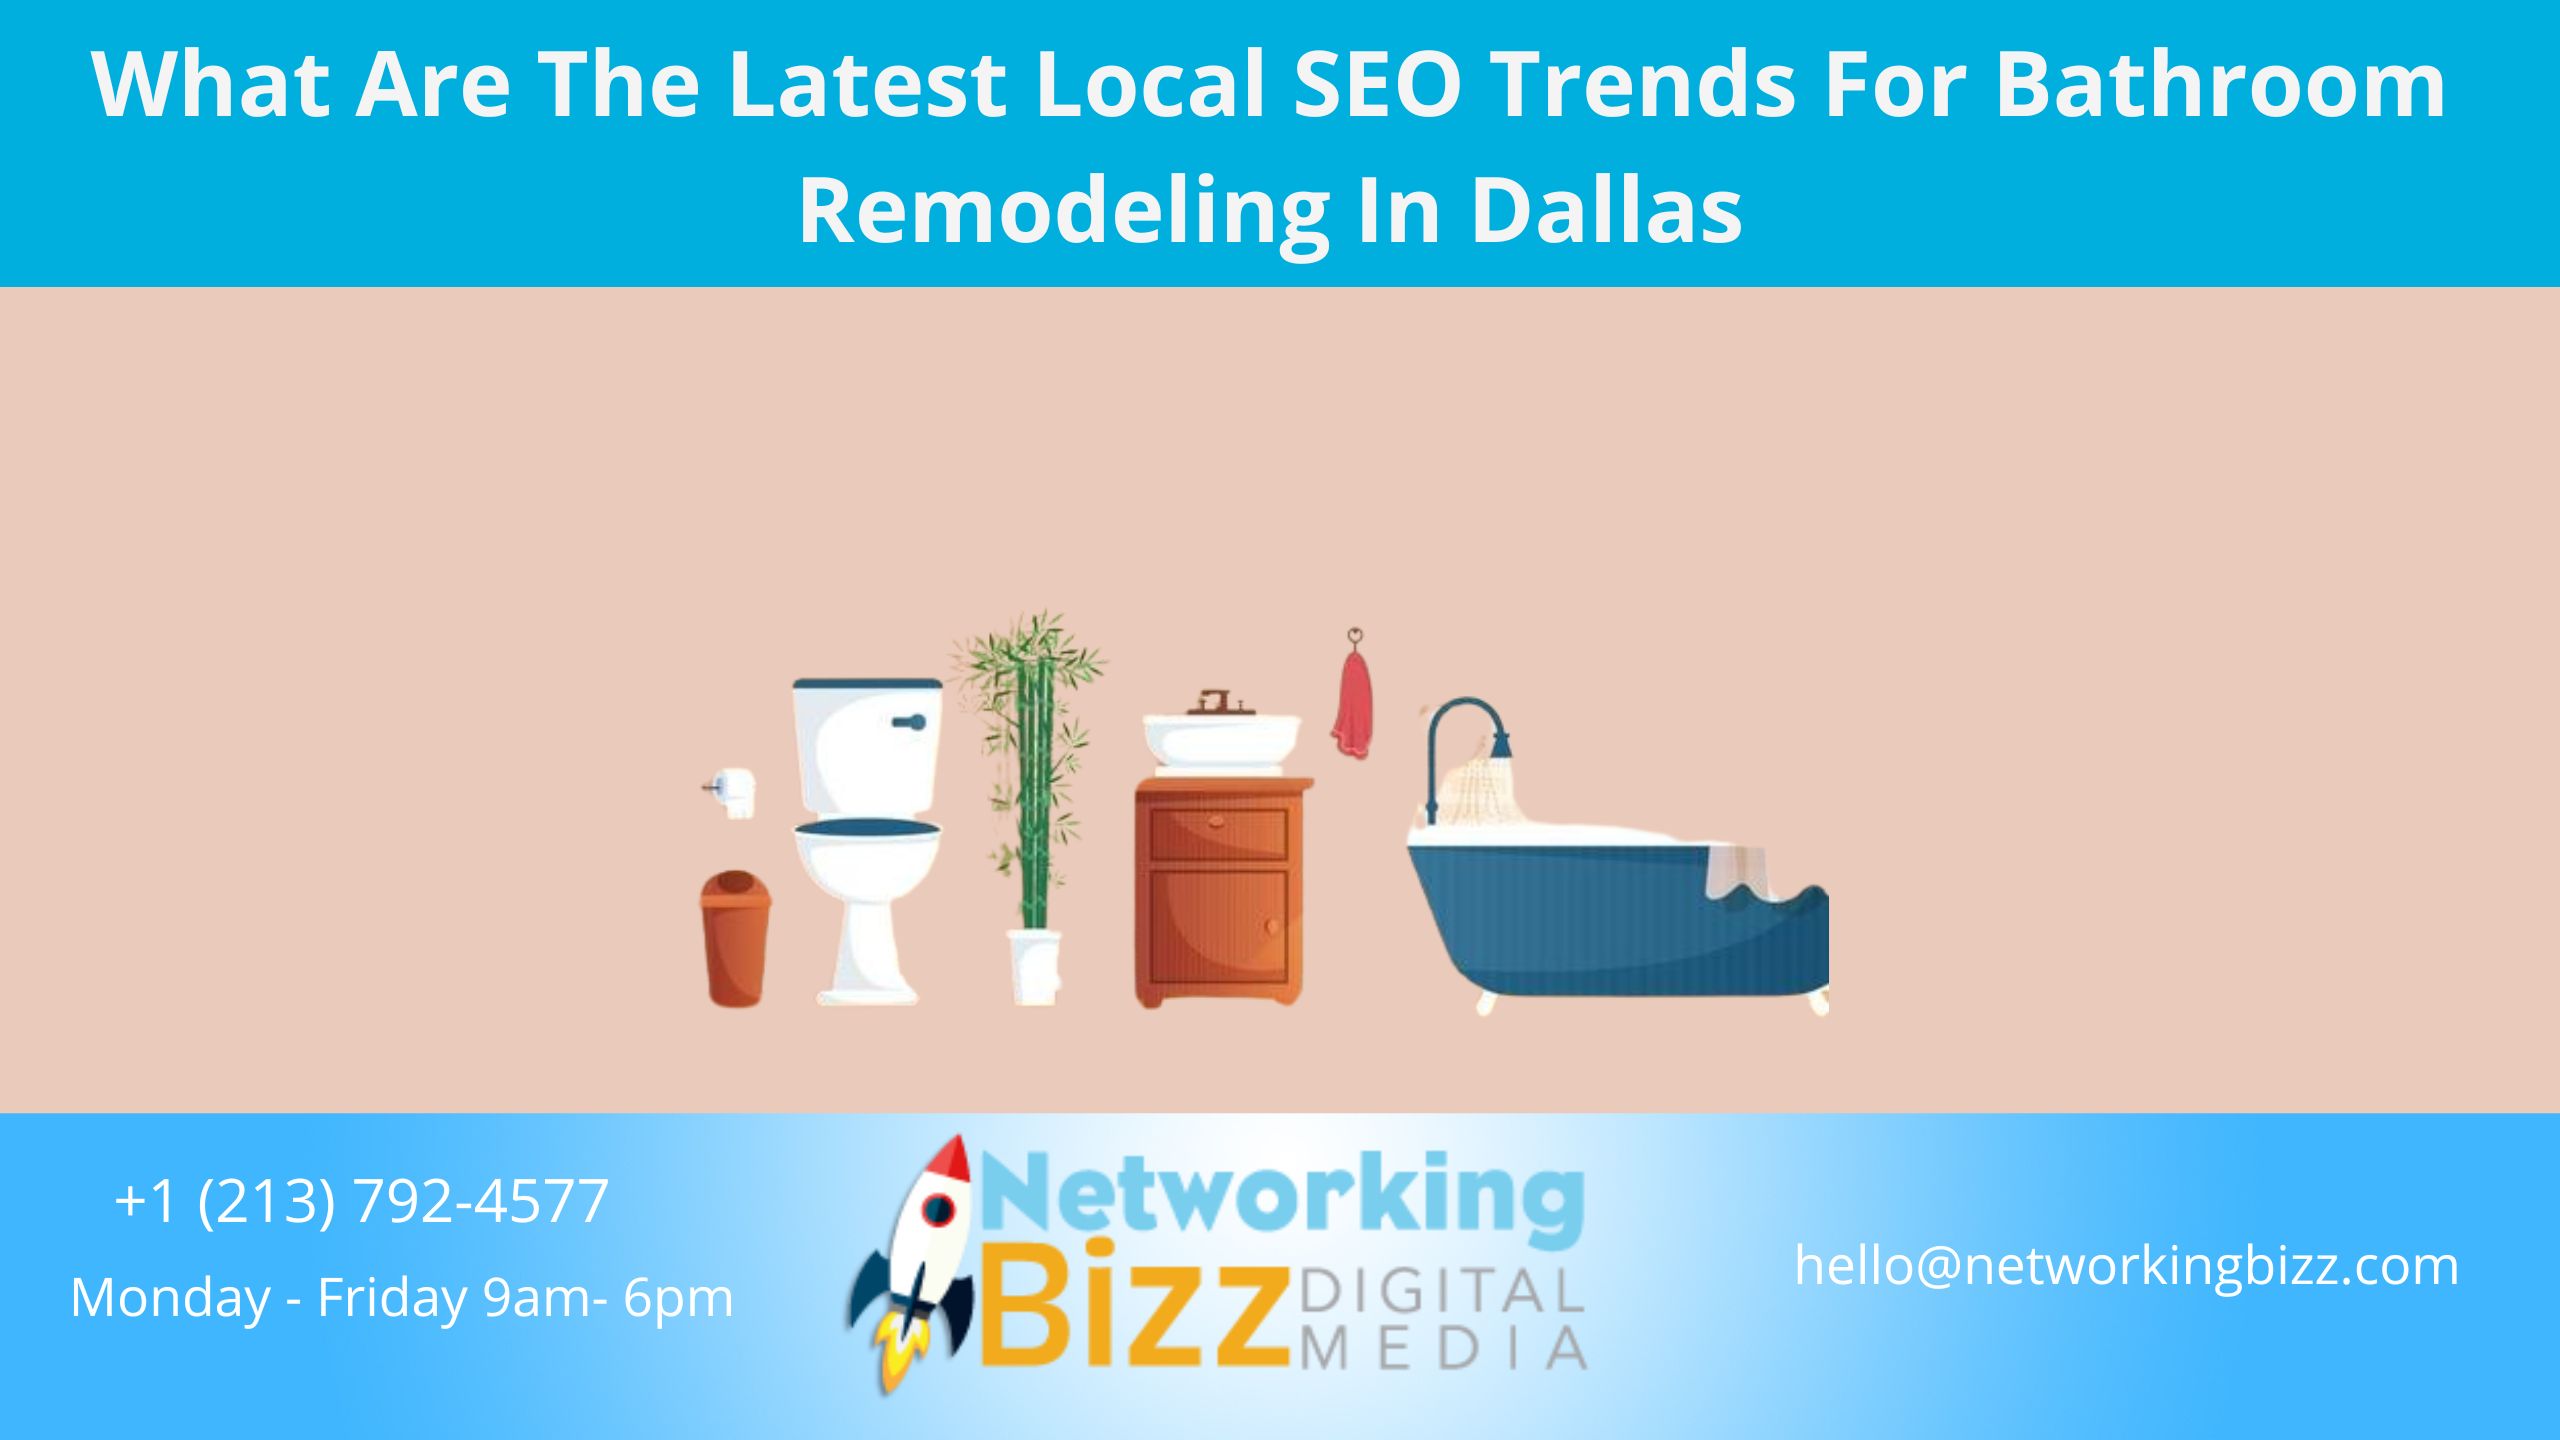 What Are The Latest Local SEO Trends For Bathroom Remodeling In Dallas